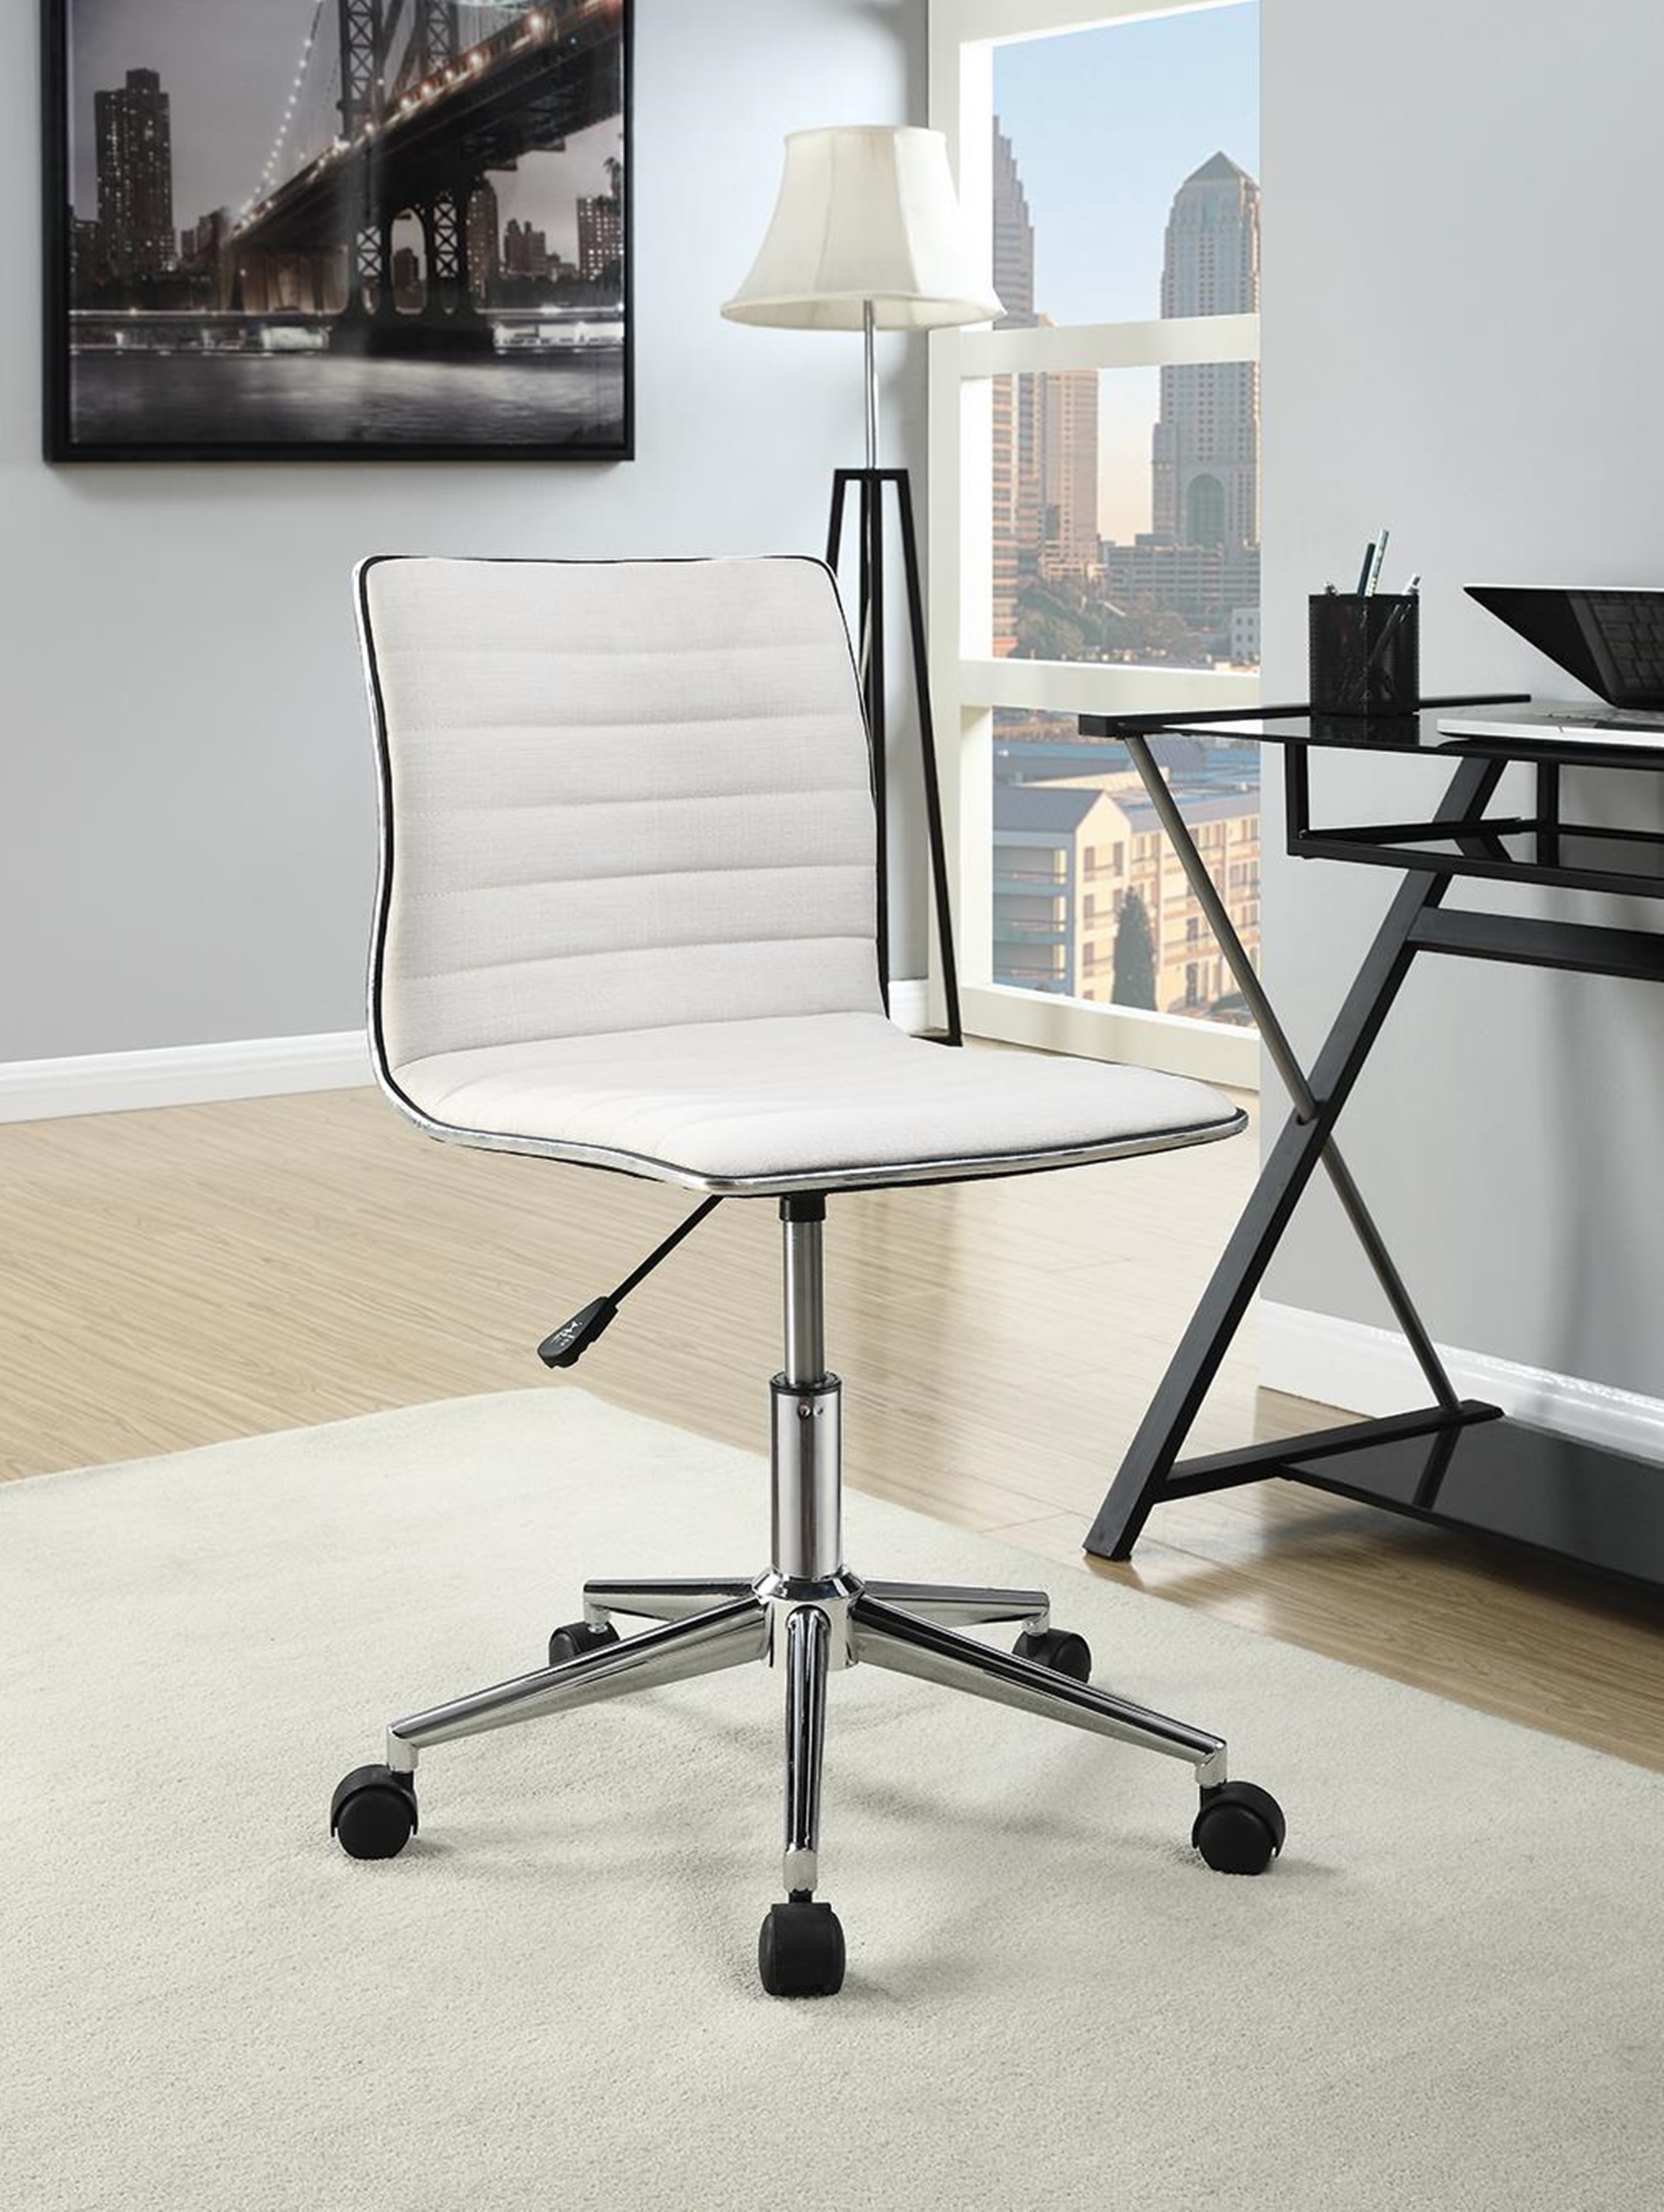 Modern White and Chrome Home Office Chair